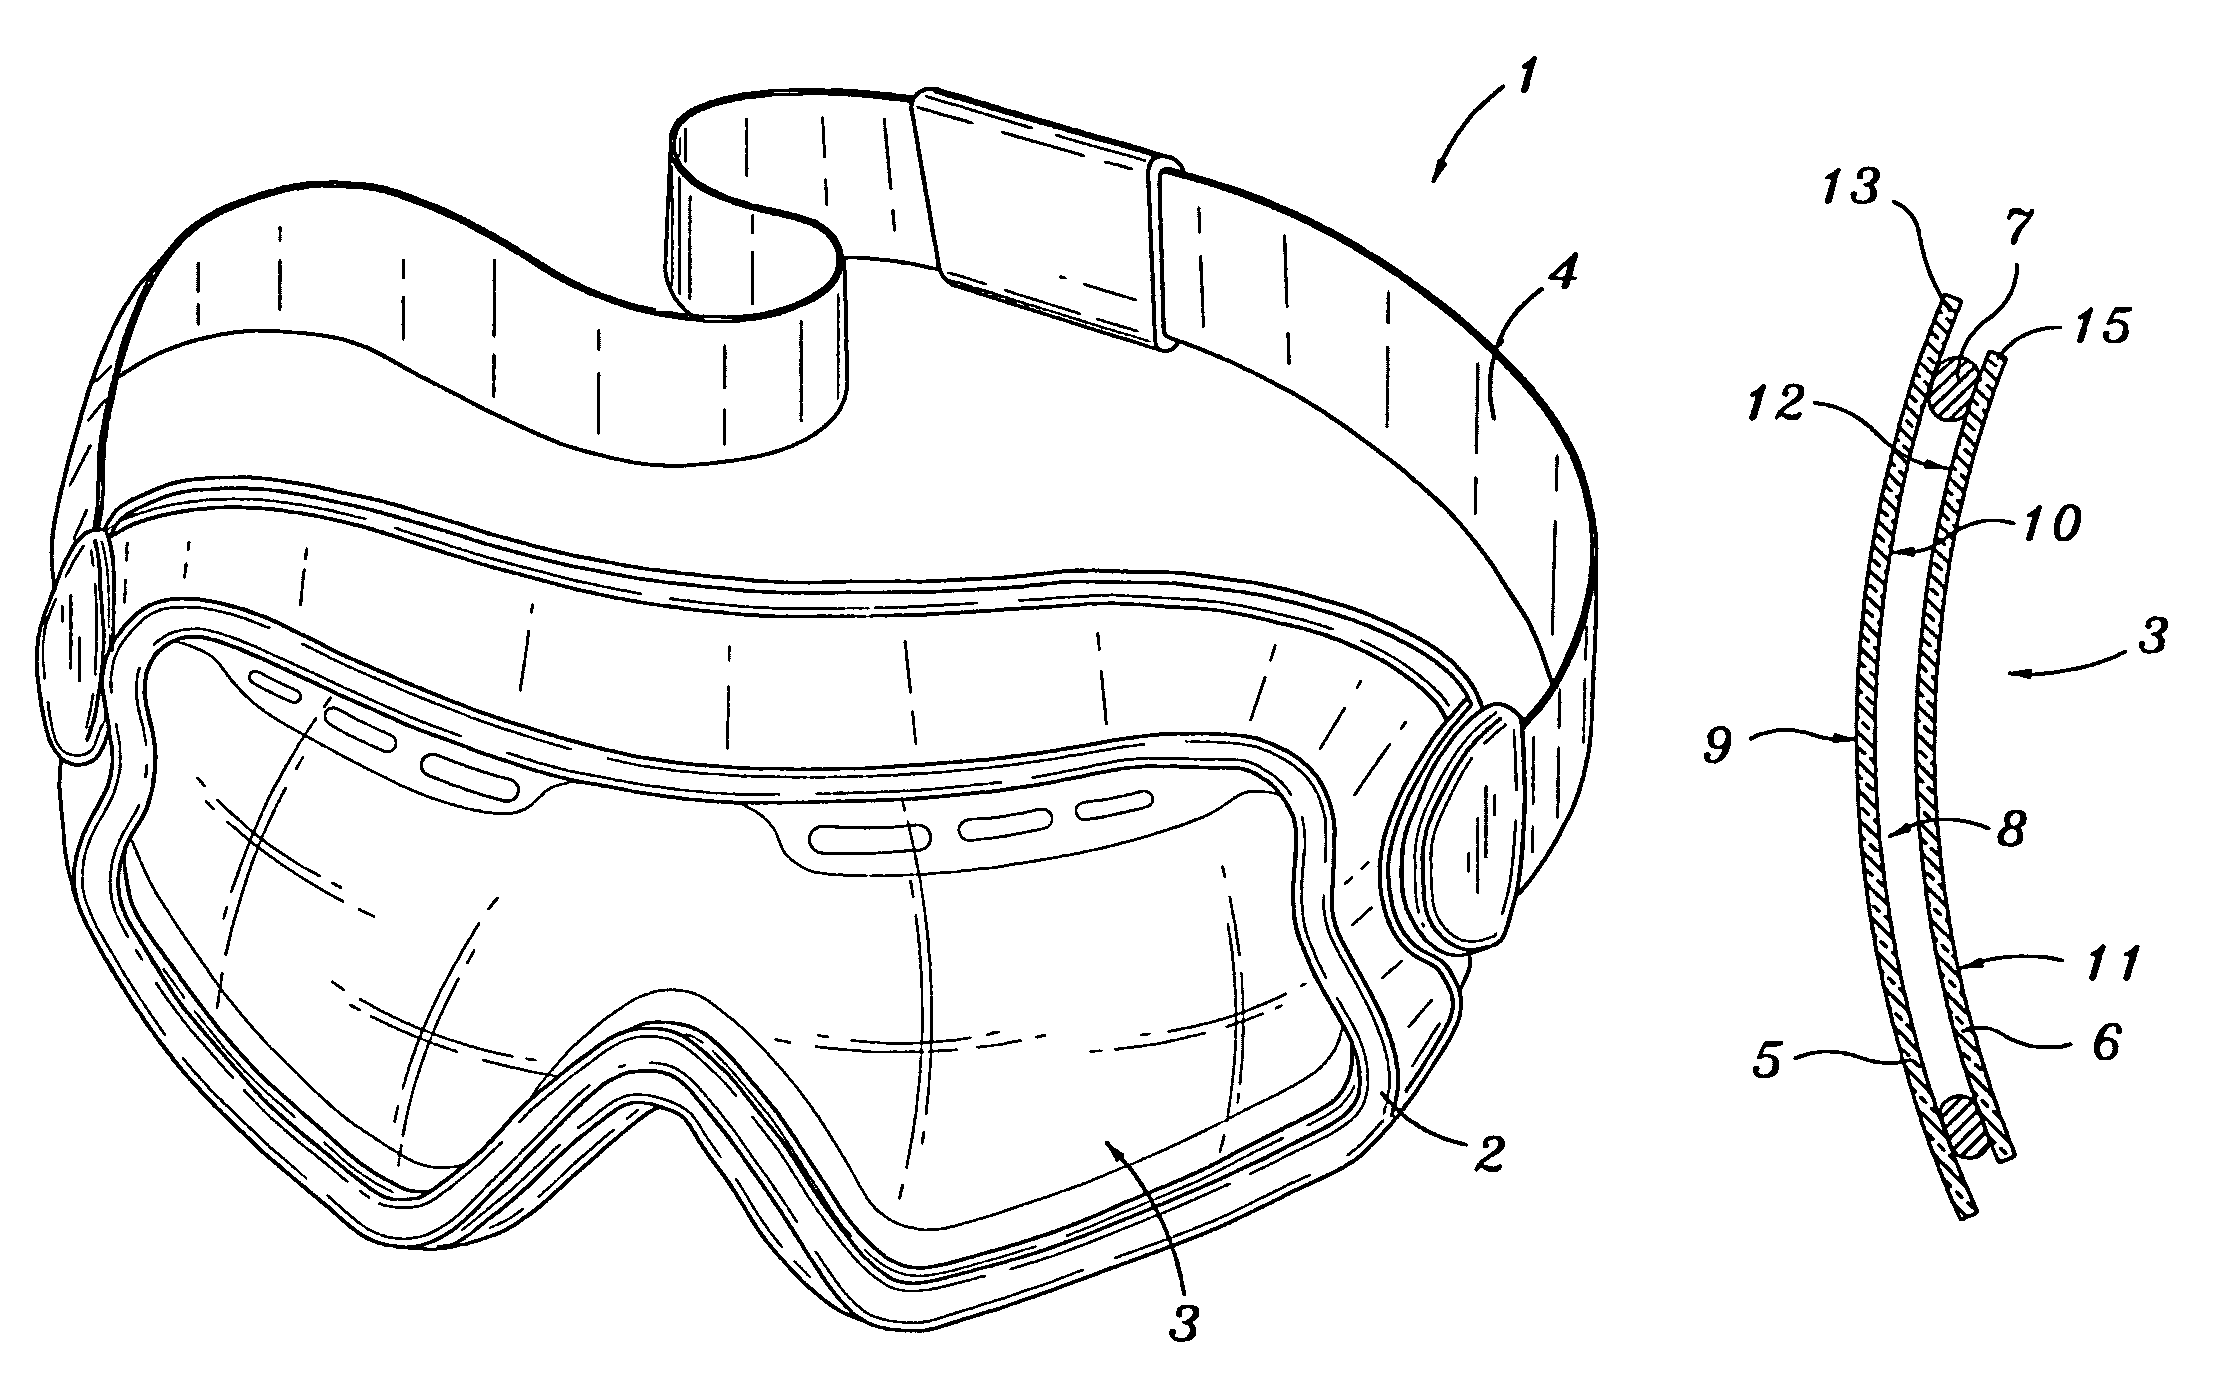 Screen for eye protection goggles and a method of forming a screen